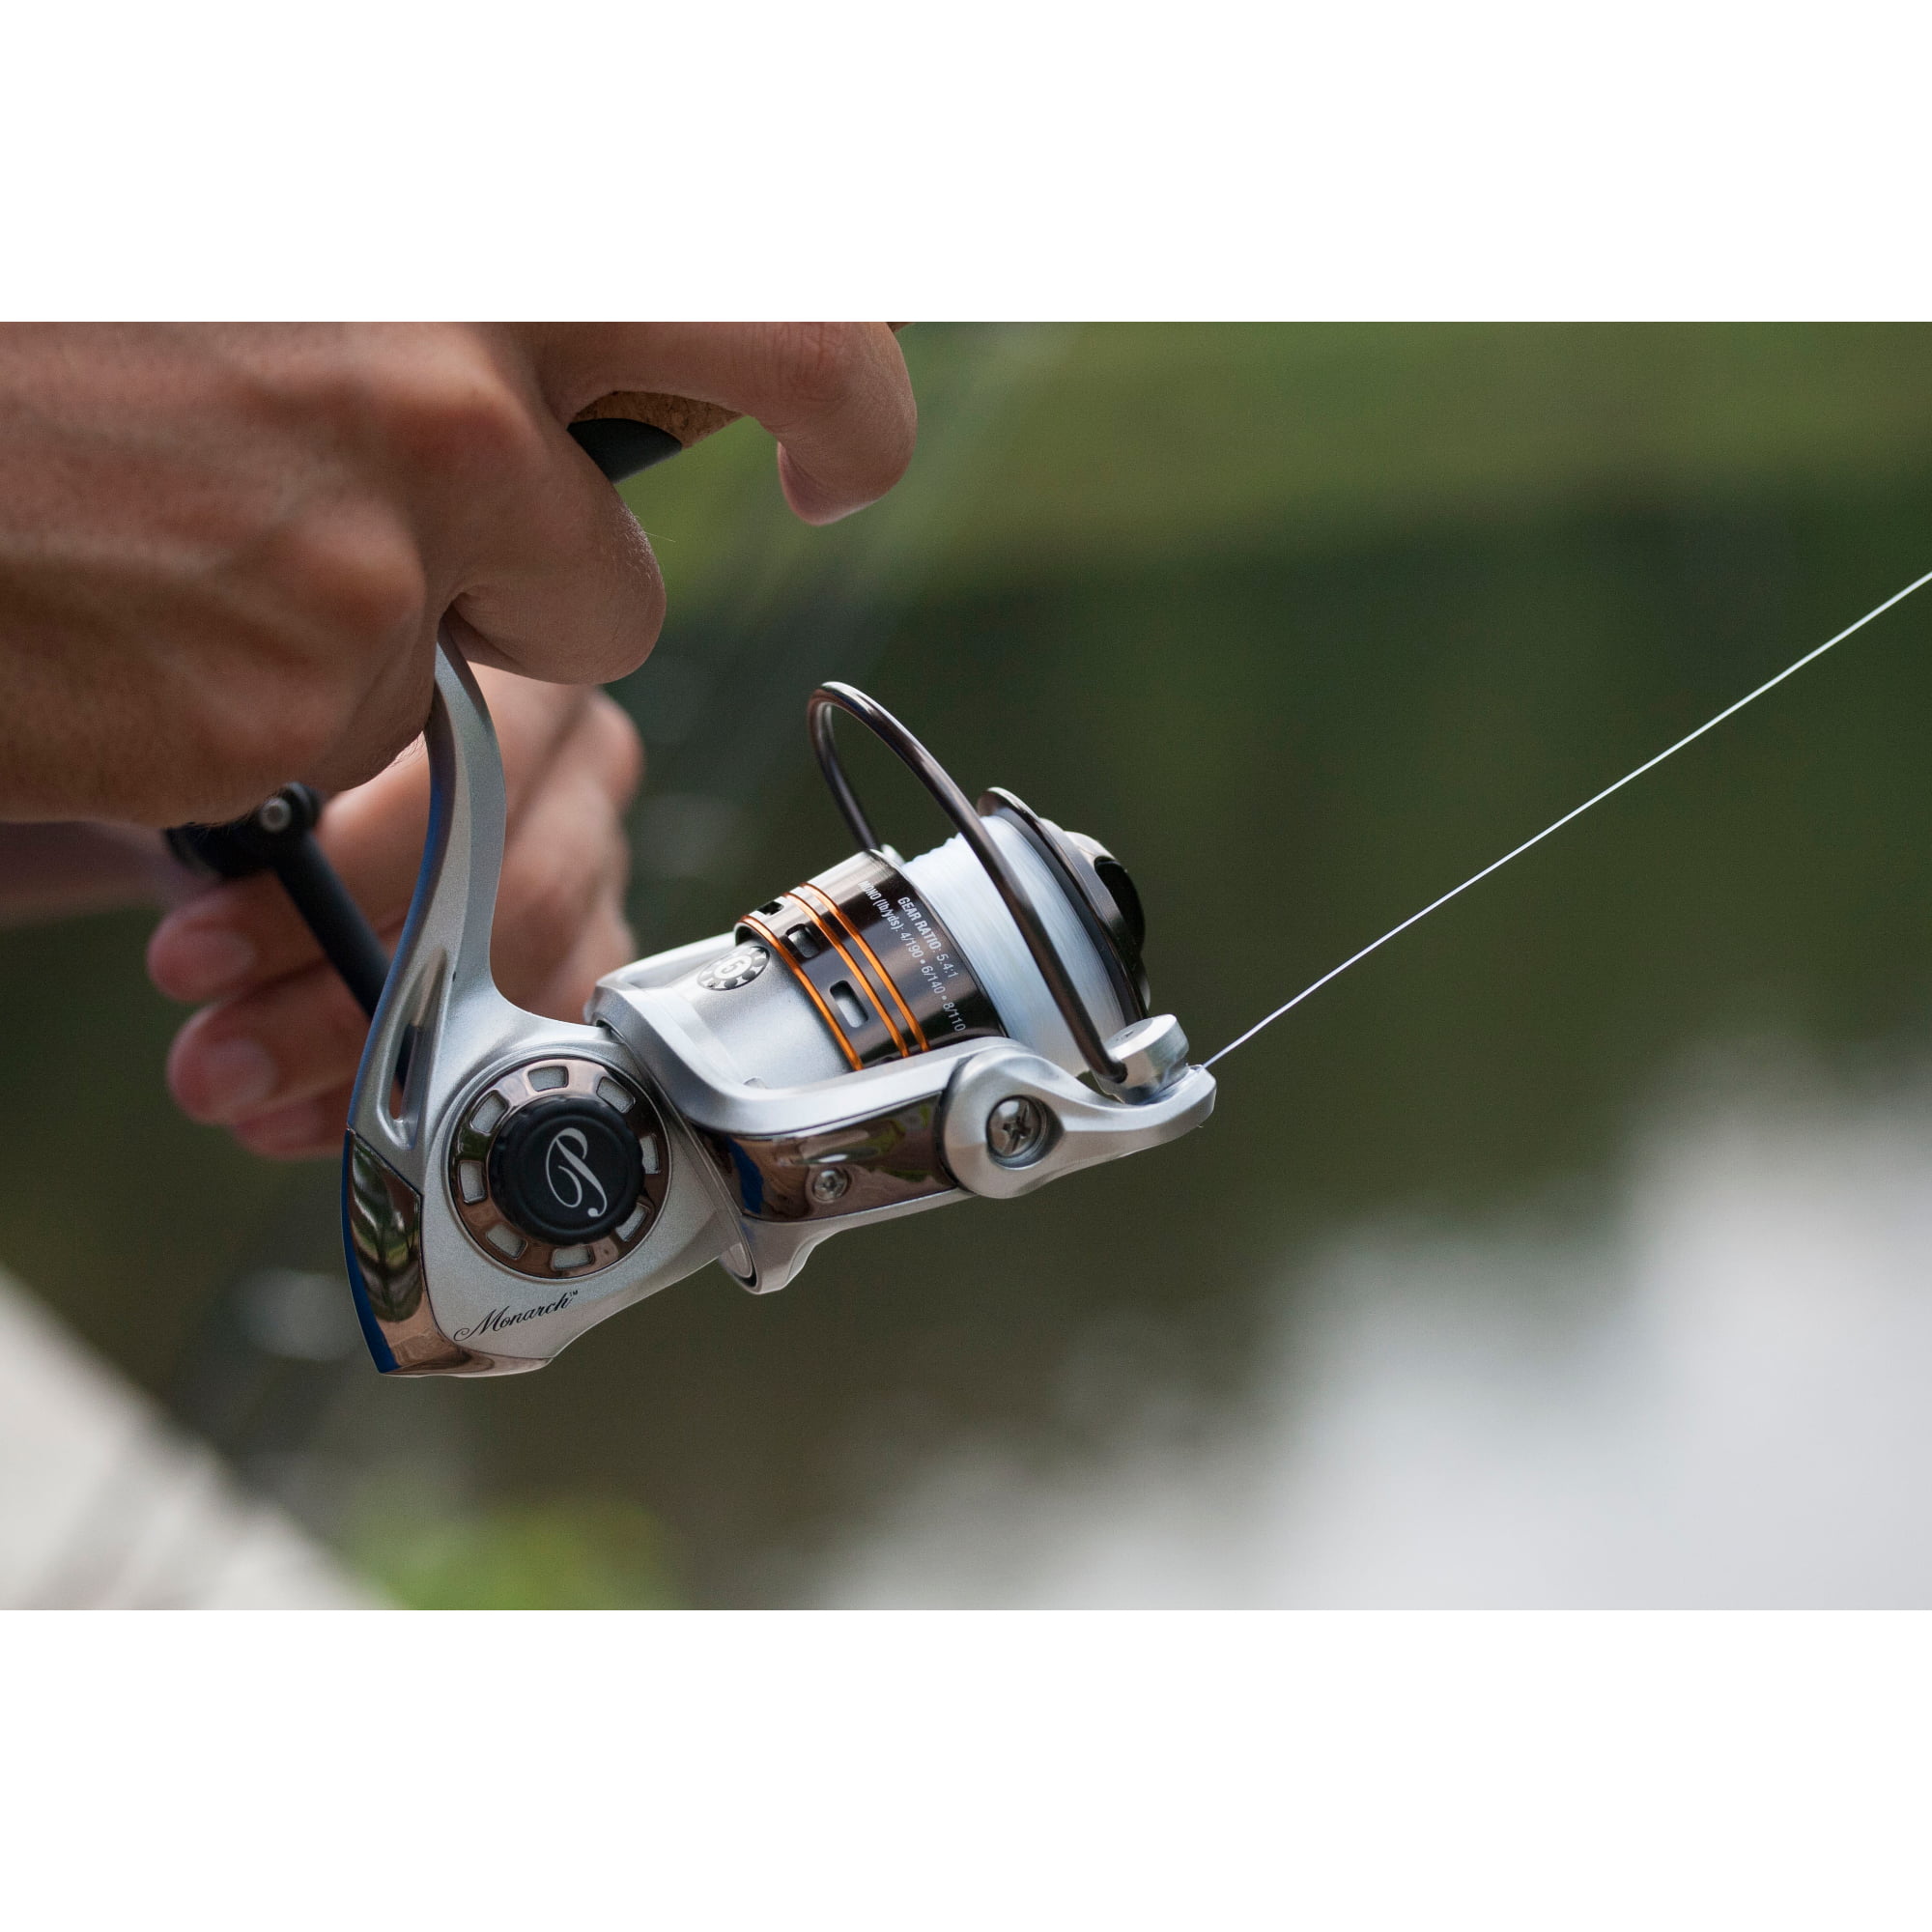 Pflueger Monarch? - Fishing Rods, Reels, Line, and Knots - Bass